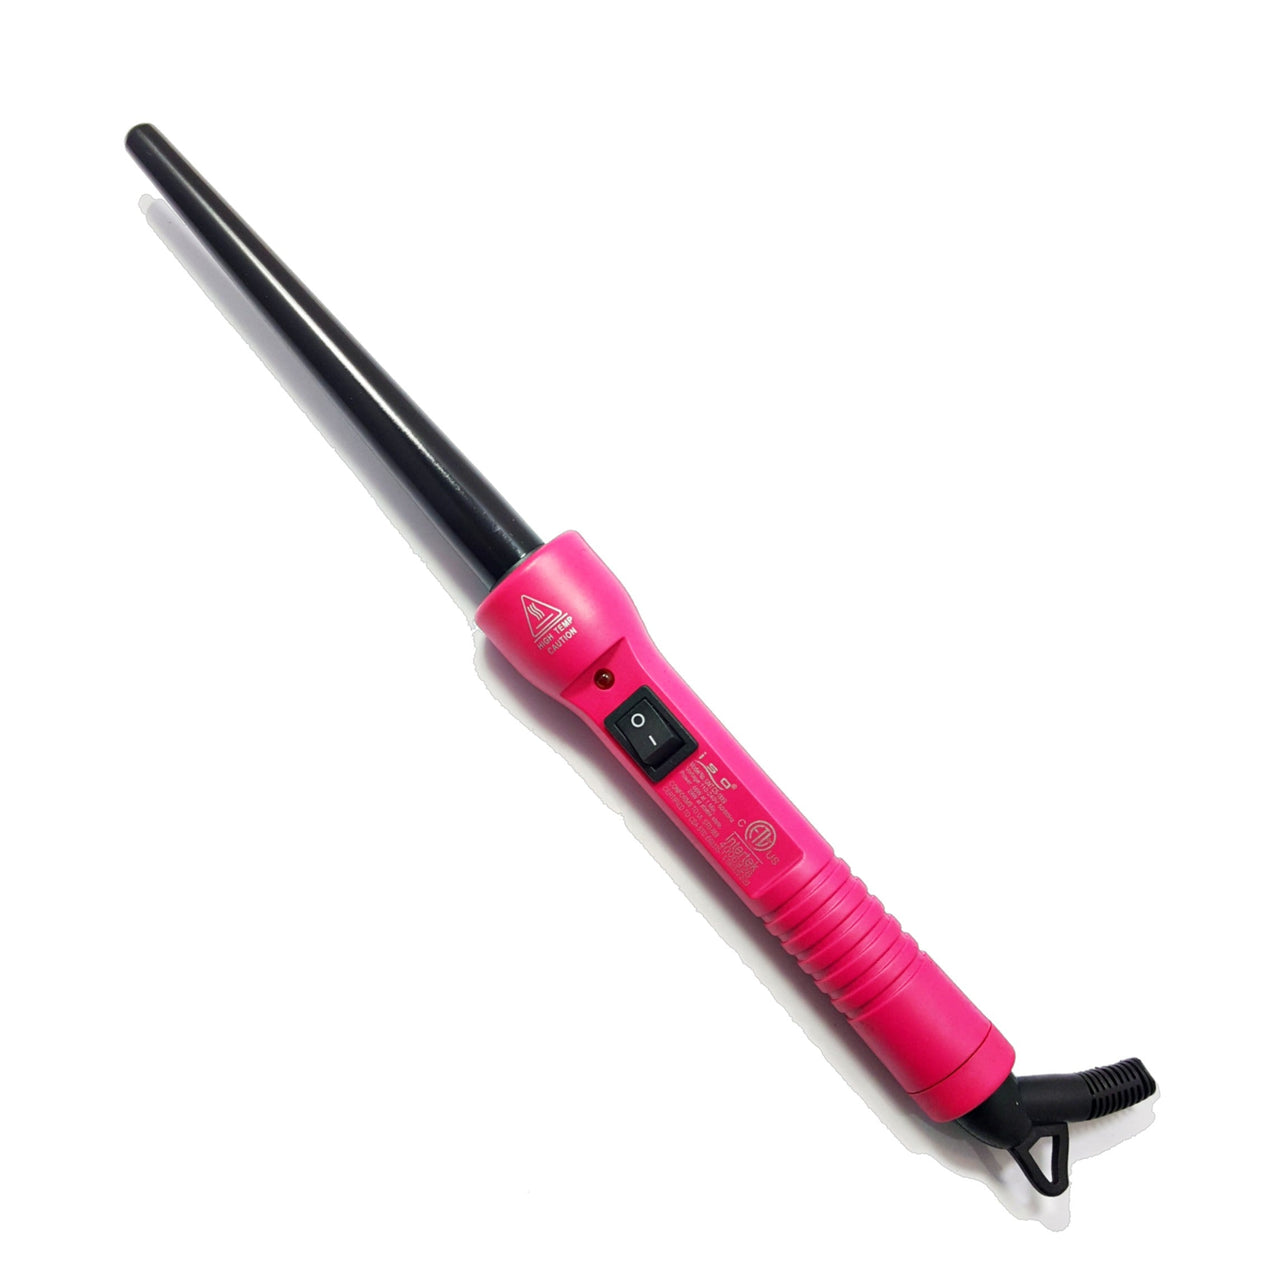 9-18mm Tapered Tourmaline Ceramic Cool Tip Curling Iron Clipless Hair Twister With Protective Glove Pink Black